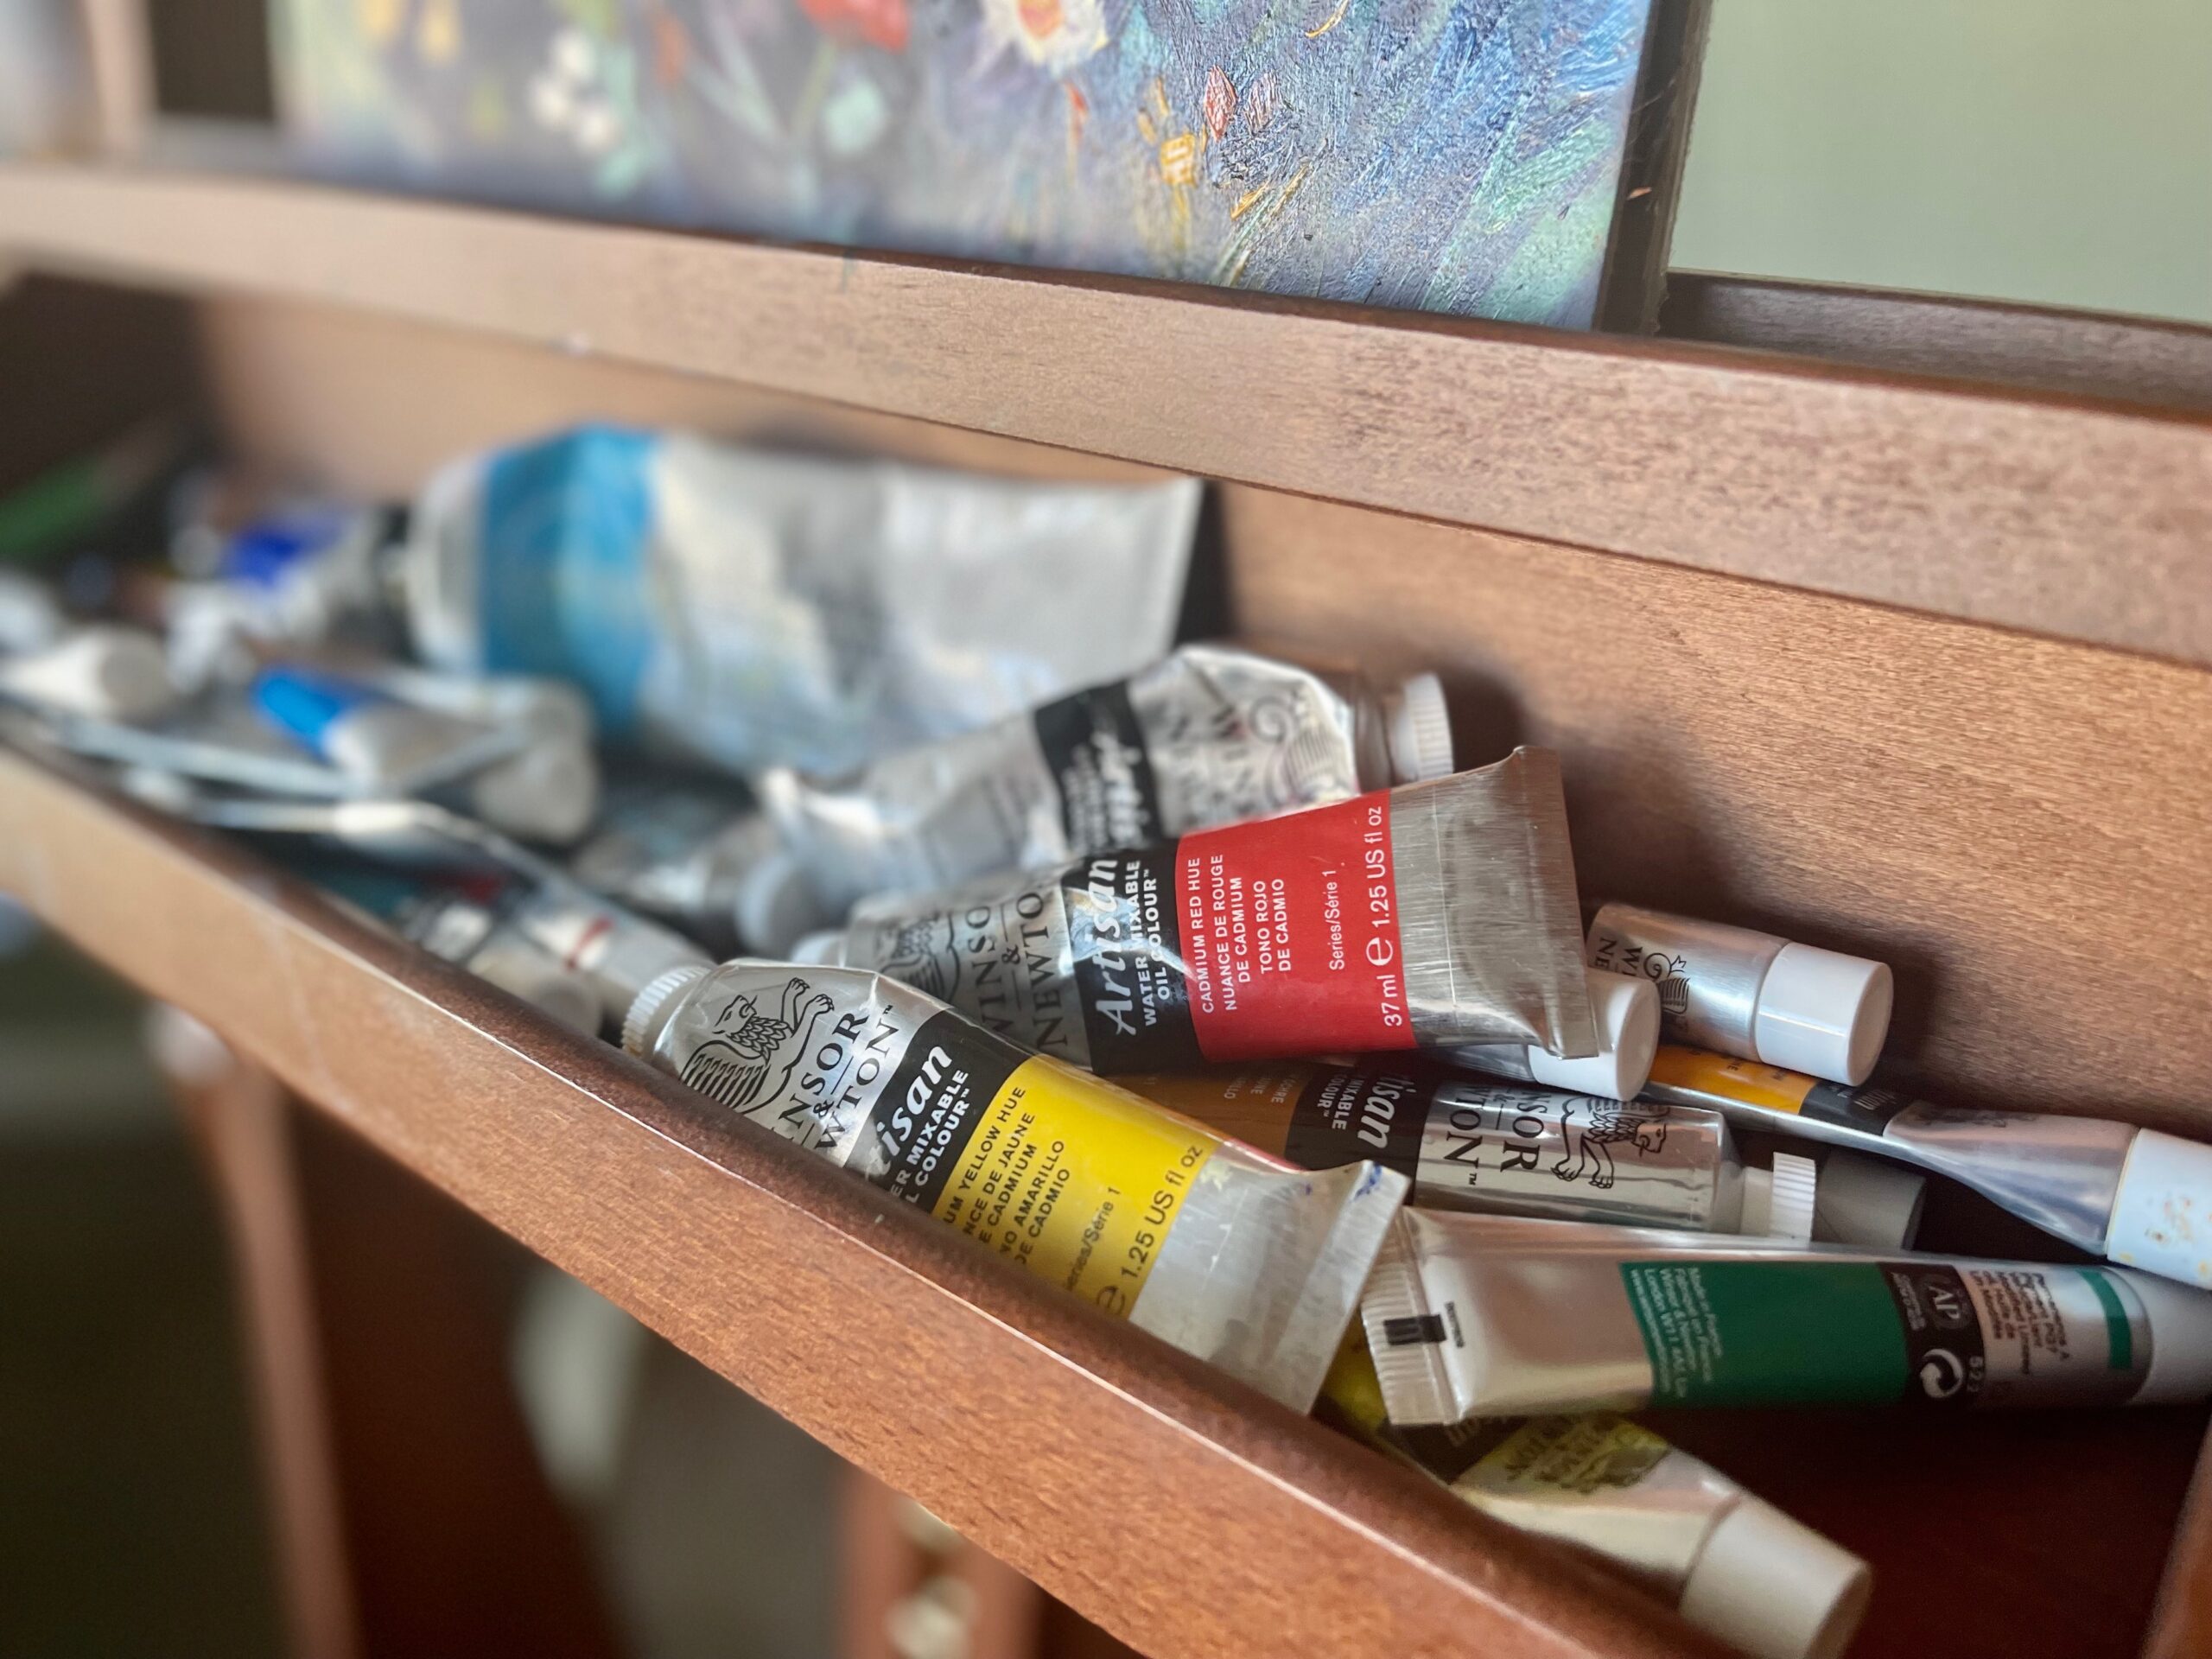 Acrylic and Oil Paint Tube Storage Ideas (Recommendations